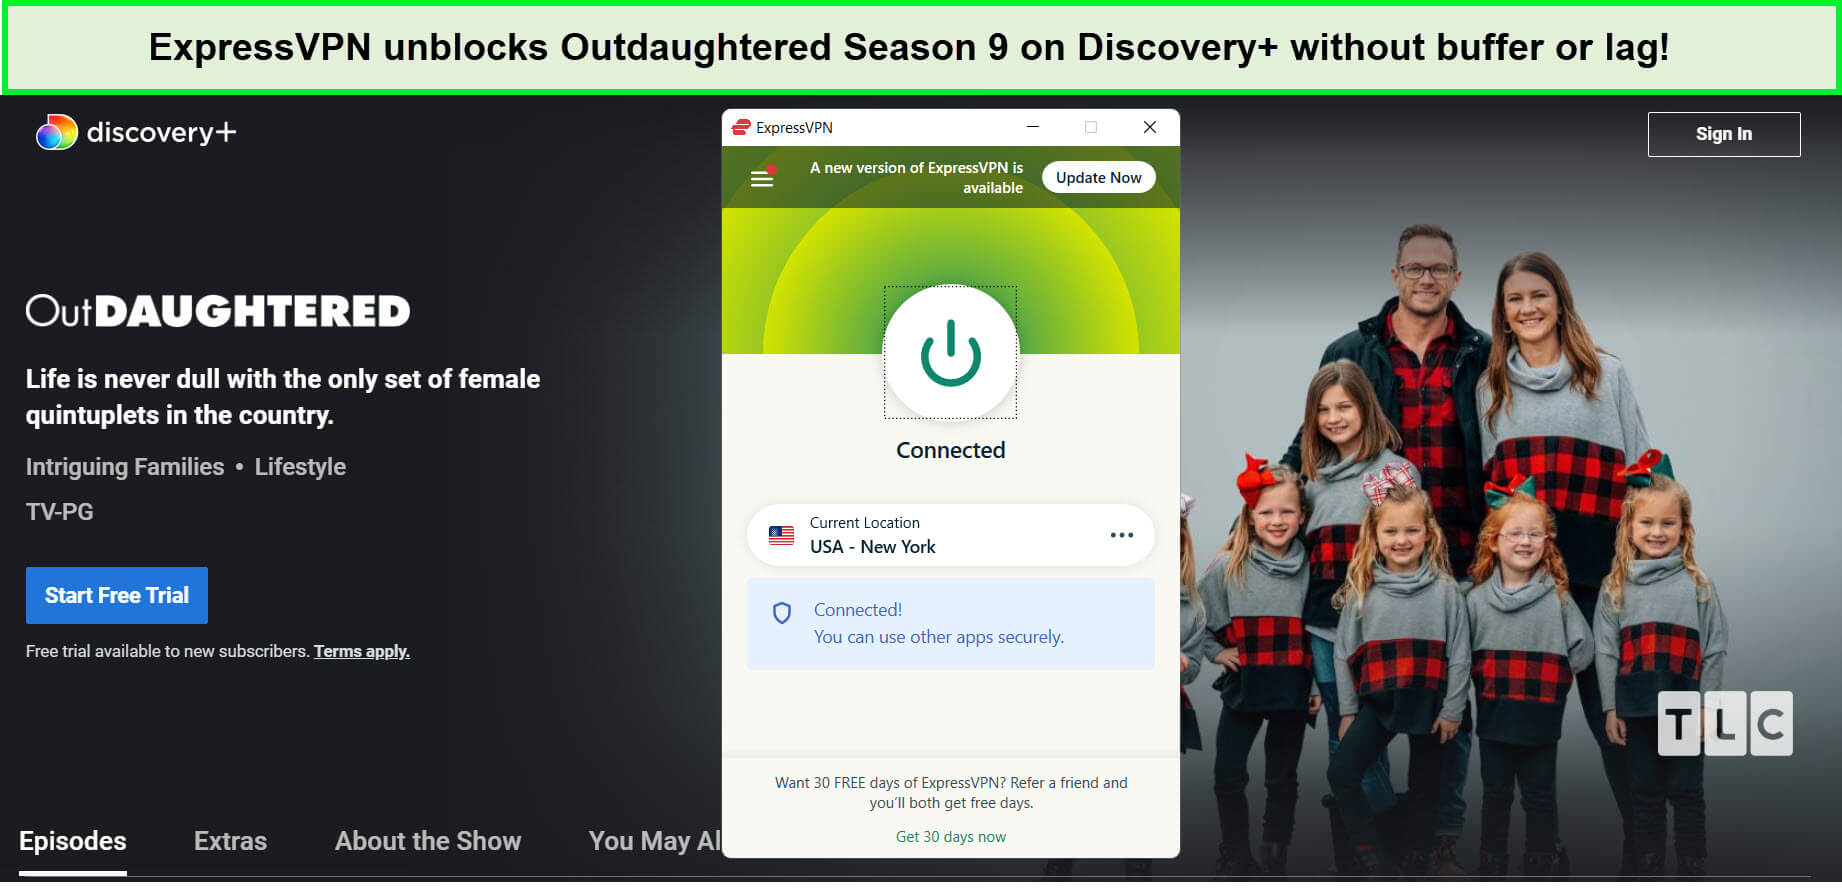 expressvpn-unblocks-outdaughtered-season-nine-on-discovery-plus-in-Spain